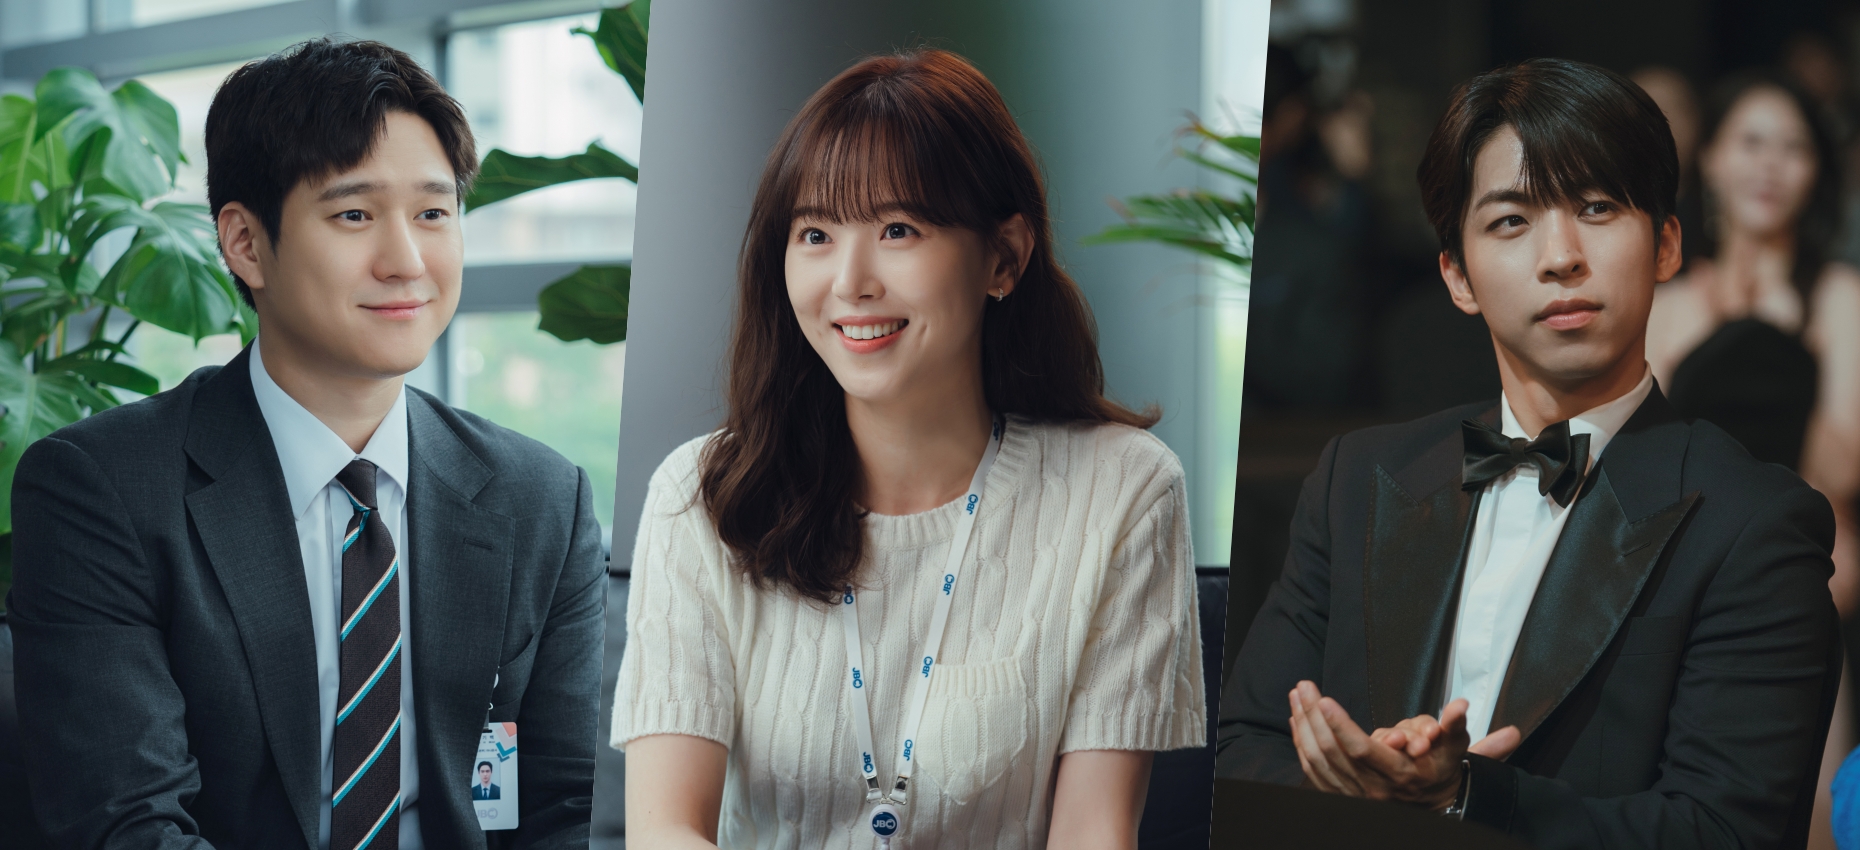 Go Kyung Pyo, Kang Han Na, And Joo Jong Hyuk Become Entangled While Working In Broadcasting Industry In New Rom-Com Drama